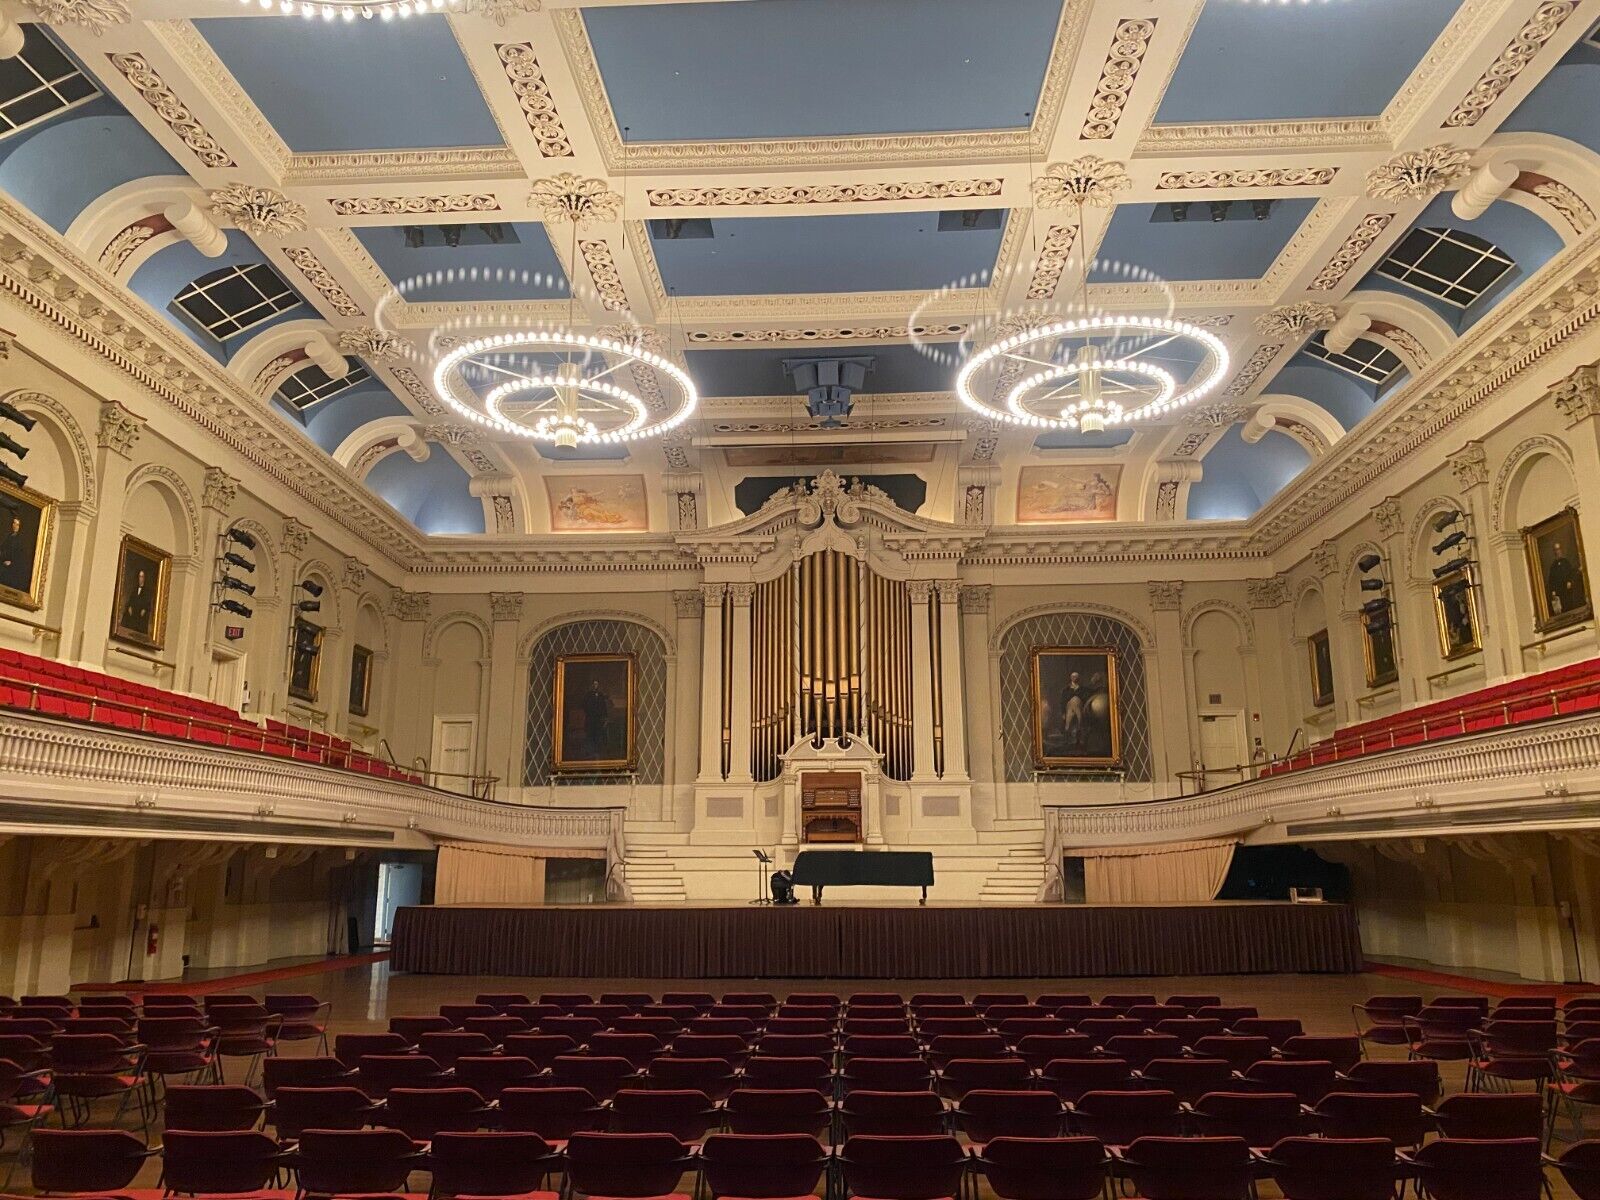 Commission An Original Musical Composition For Mechanics Hall ($1200 Value)